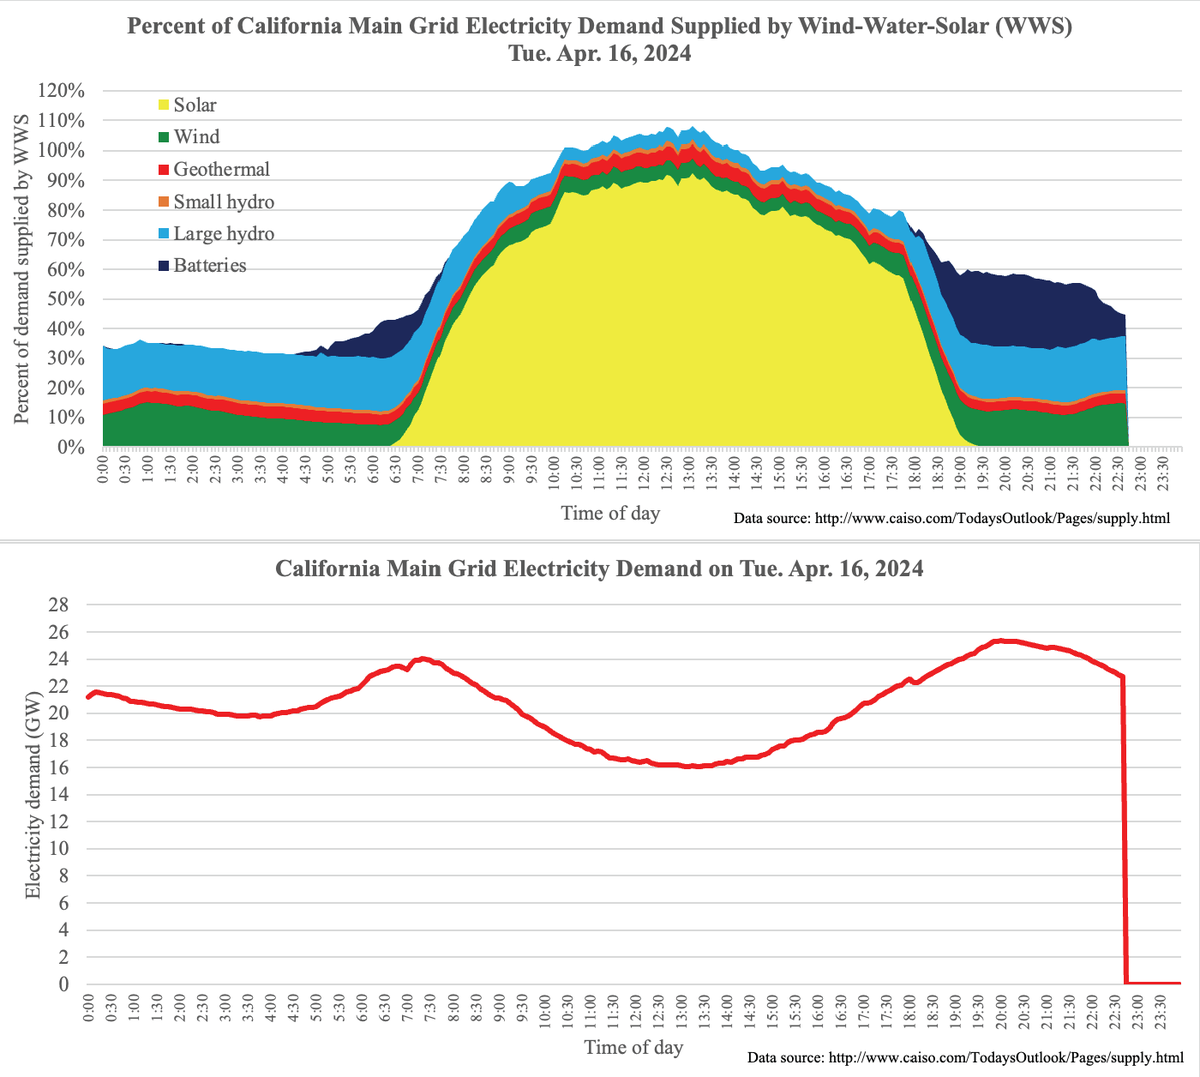 20% of California's energy demand supplied by batteries from 7-10 PM tonight. Plus (the boring and normal part now) 32 out of last 40 days, CA exceeds 100% #WindWaterSolar on its main grid, today for 3.83 hours, with a peak of 108.2%. We have solutions. @California_ISO